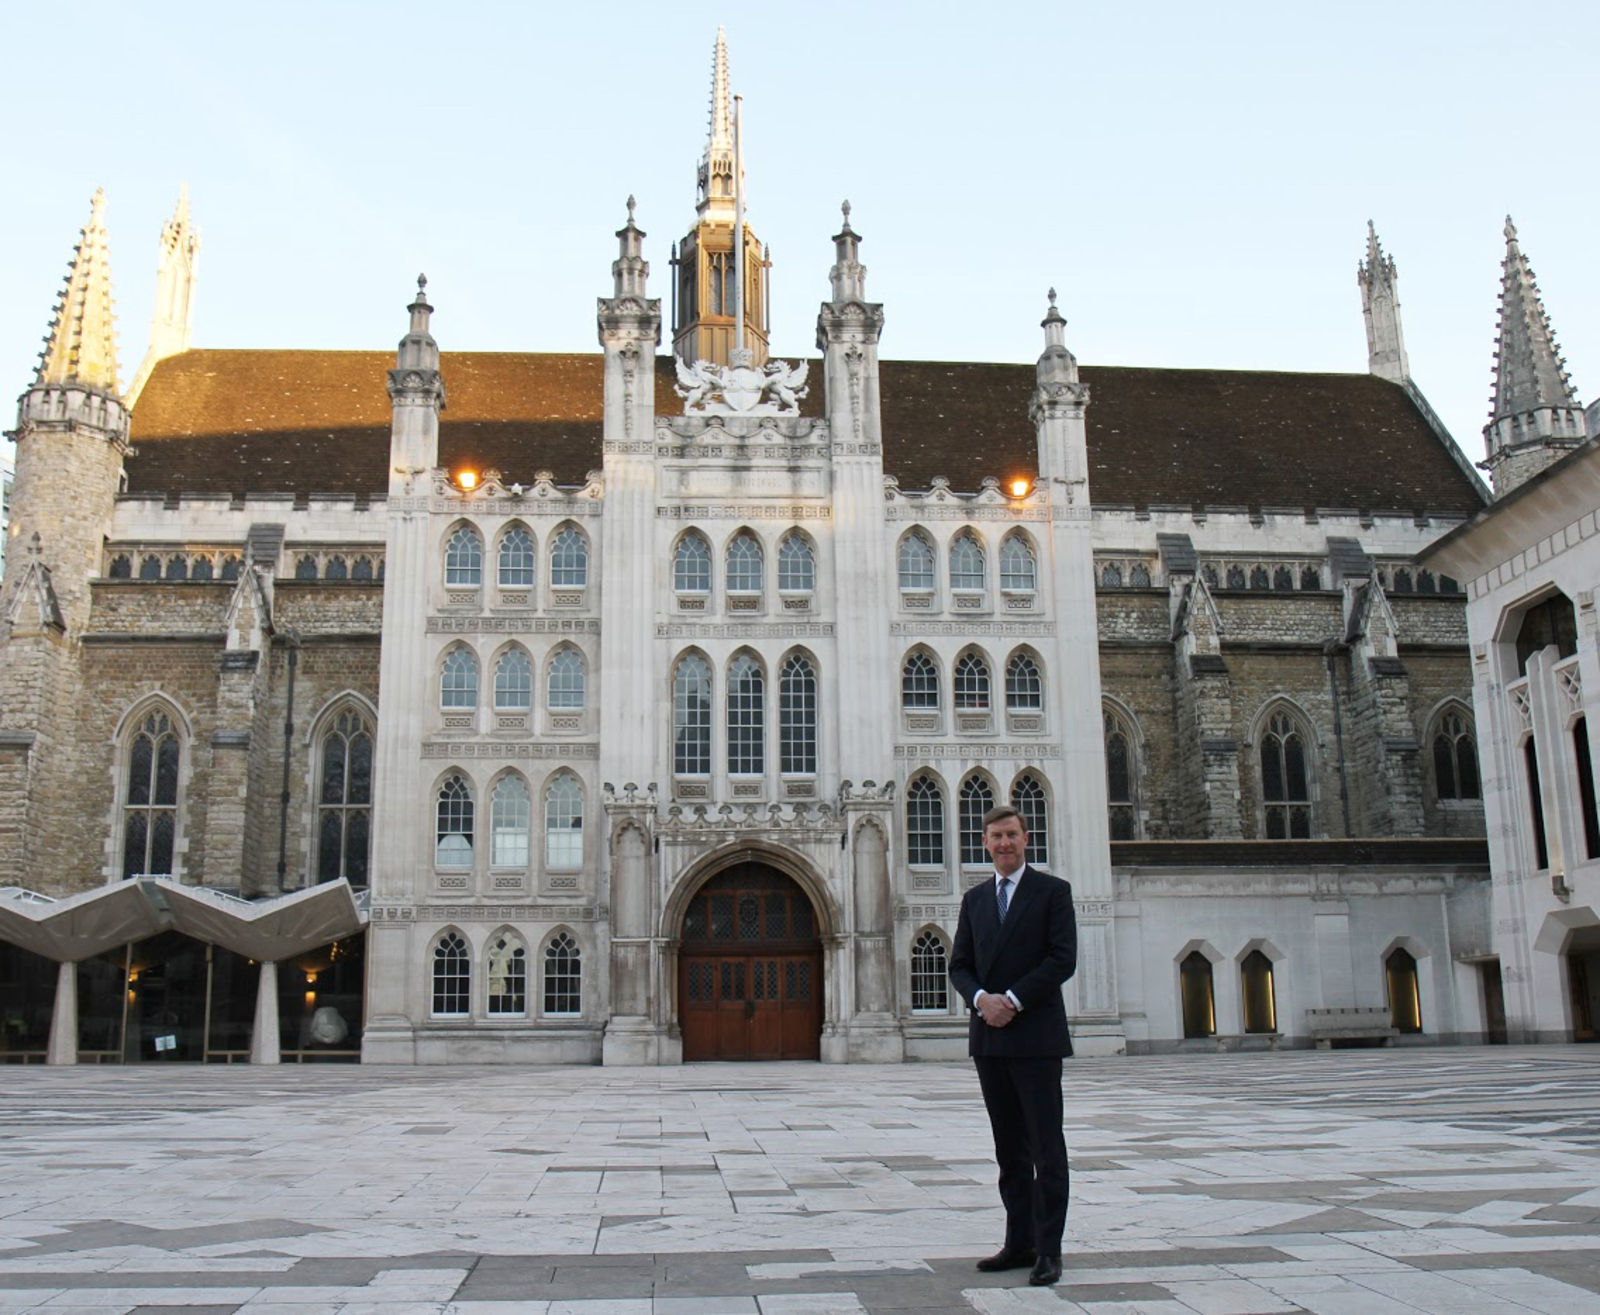 In front of Guidhall,  City of London